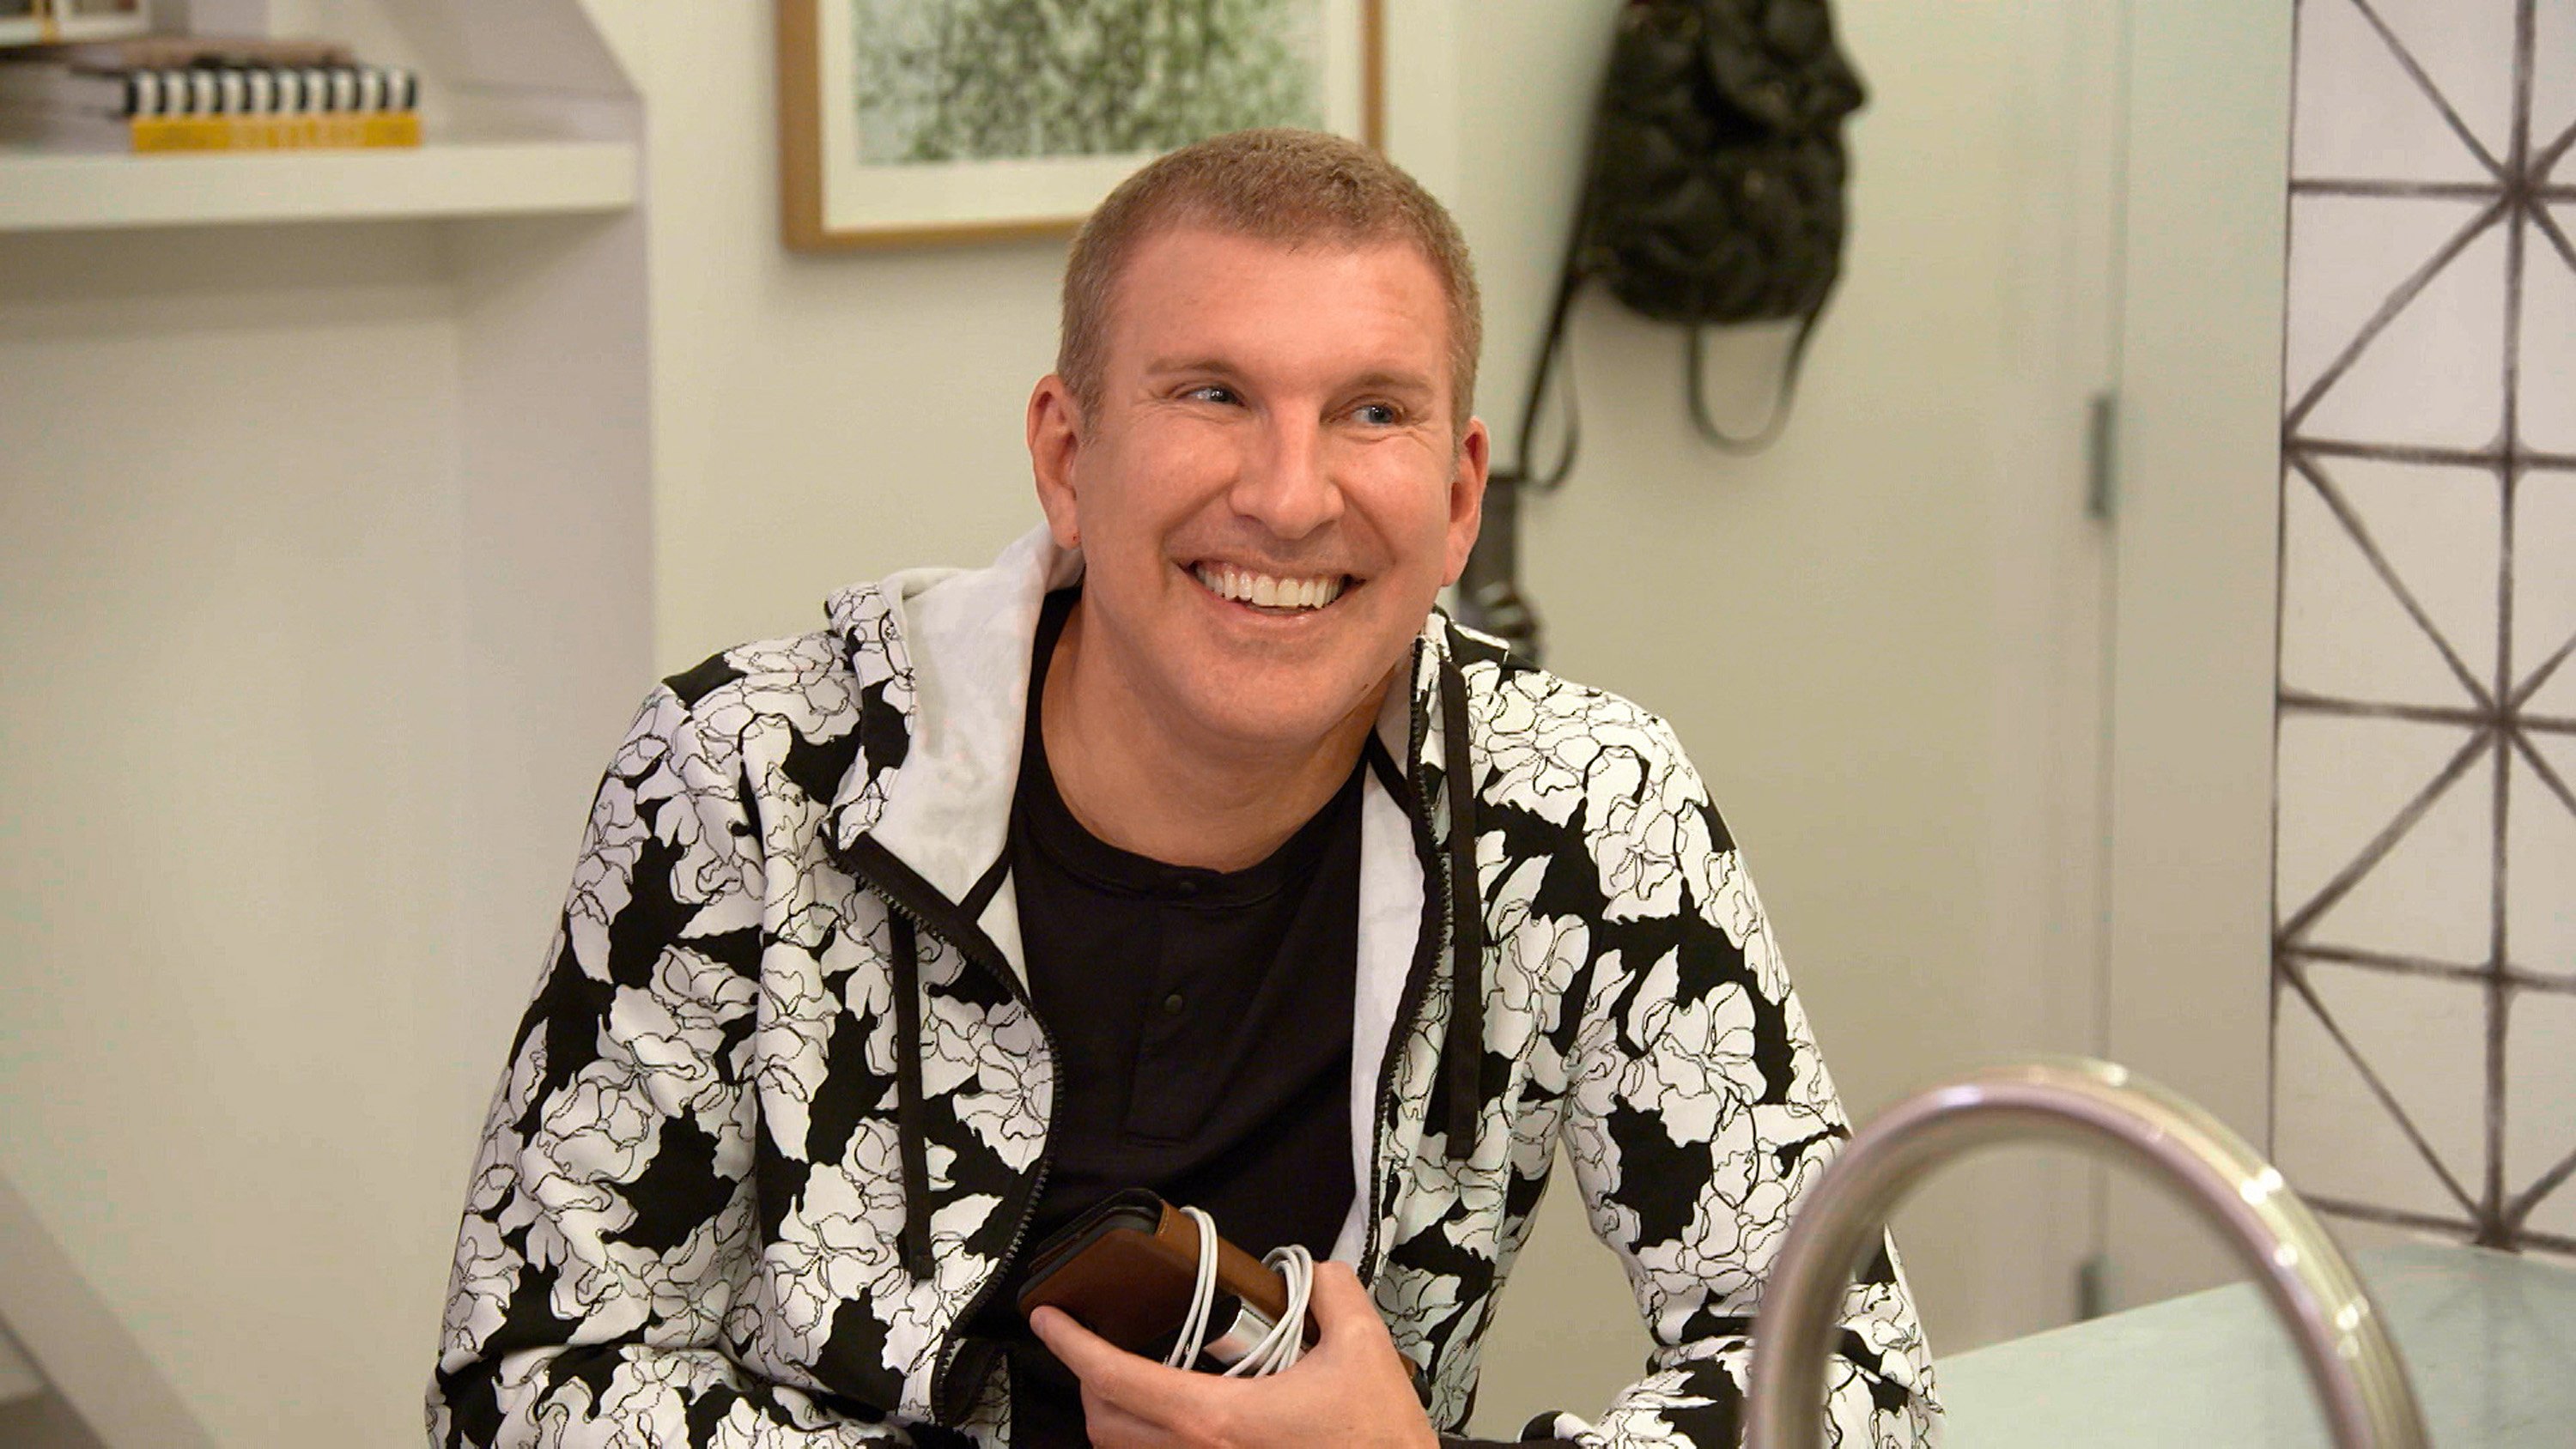 Smiling photo of Todd Chrisley from 'Chrisley Knows Best'